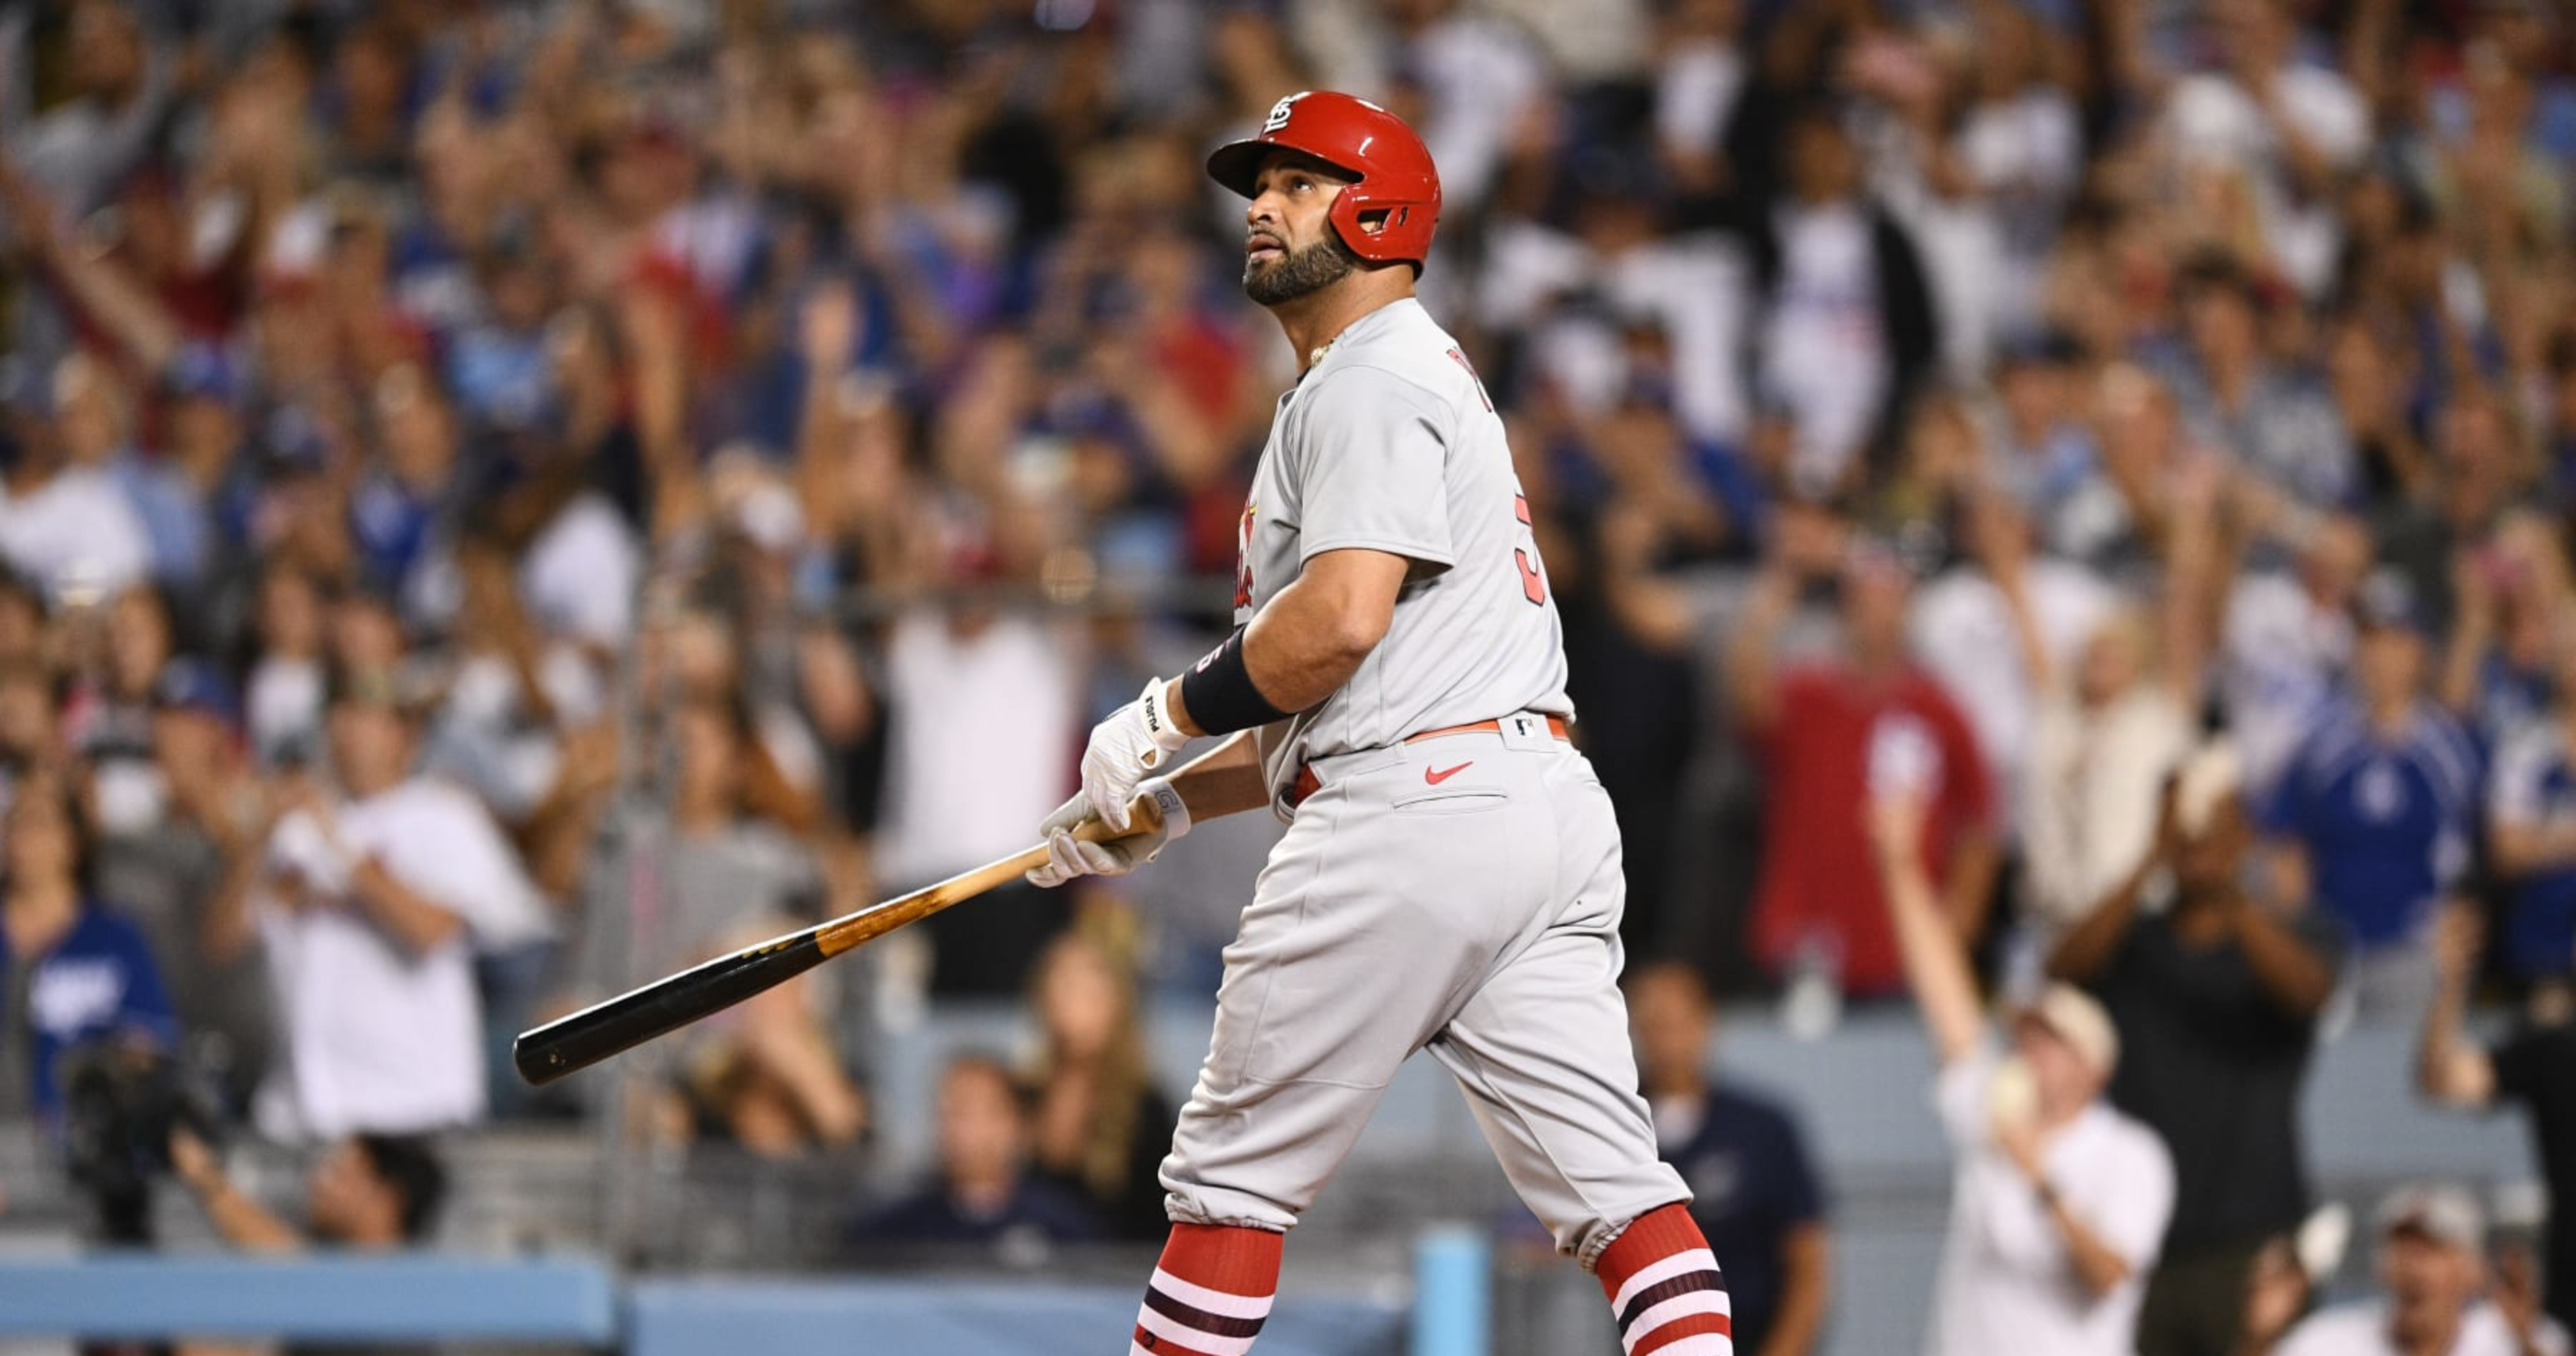 Albert Pujols gifts jersey to fan amid chase for 700 home run club